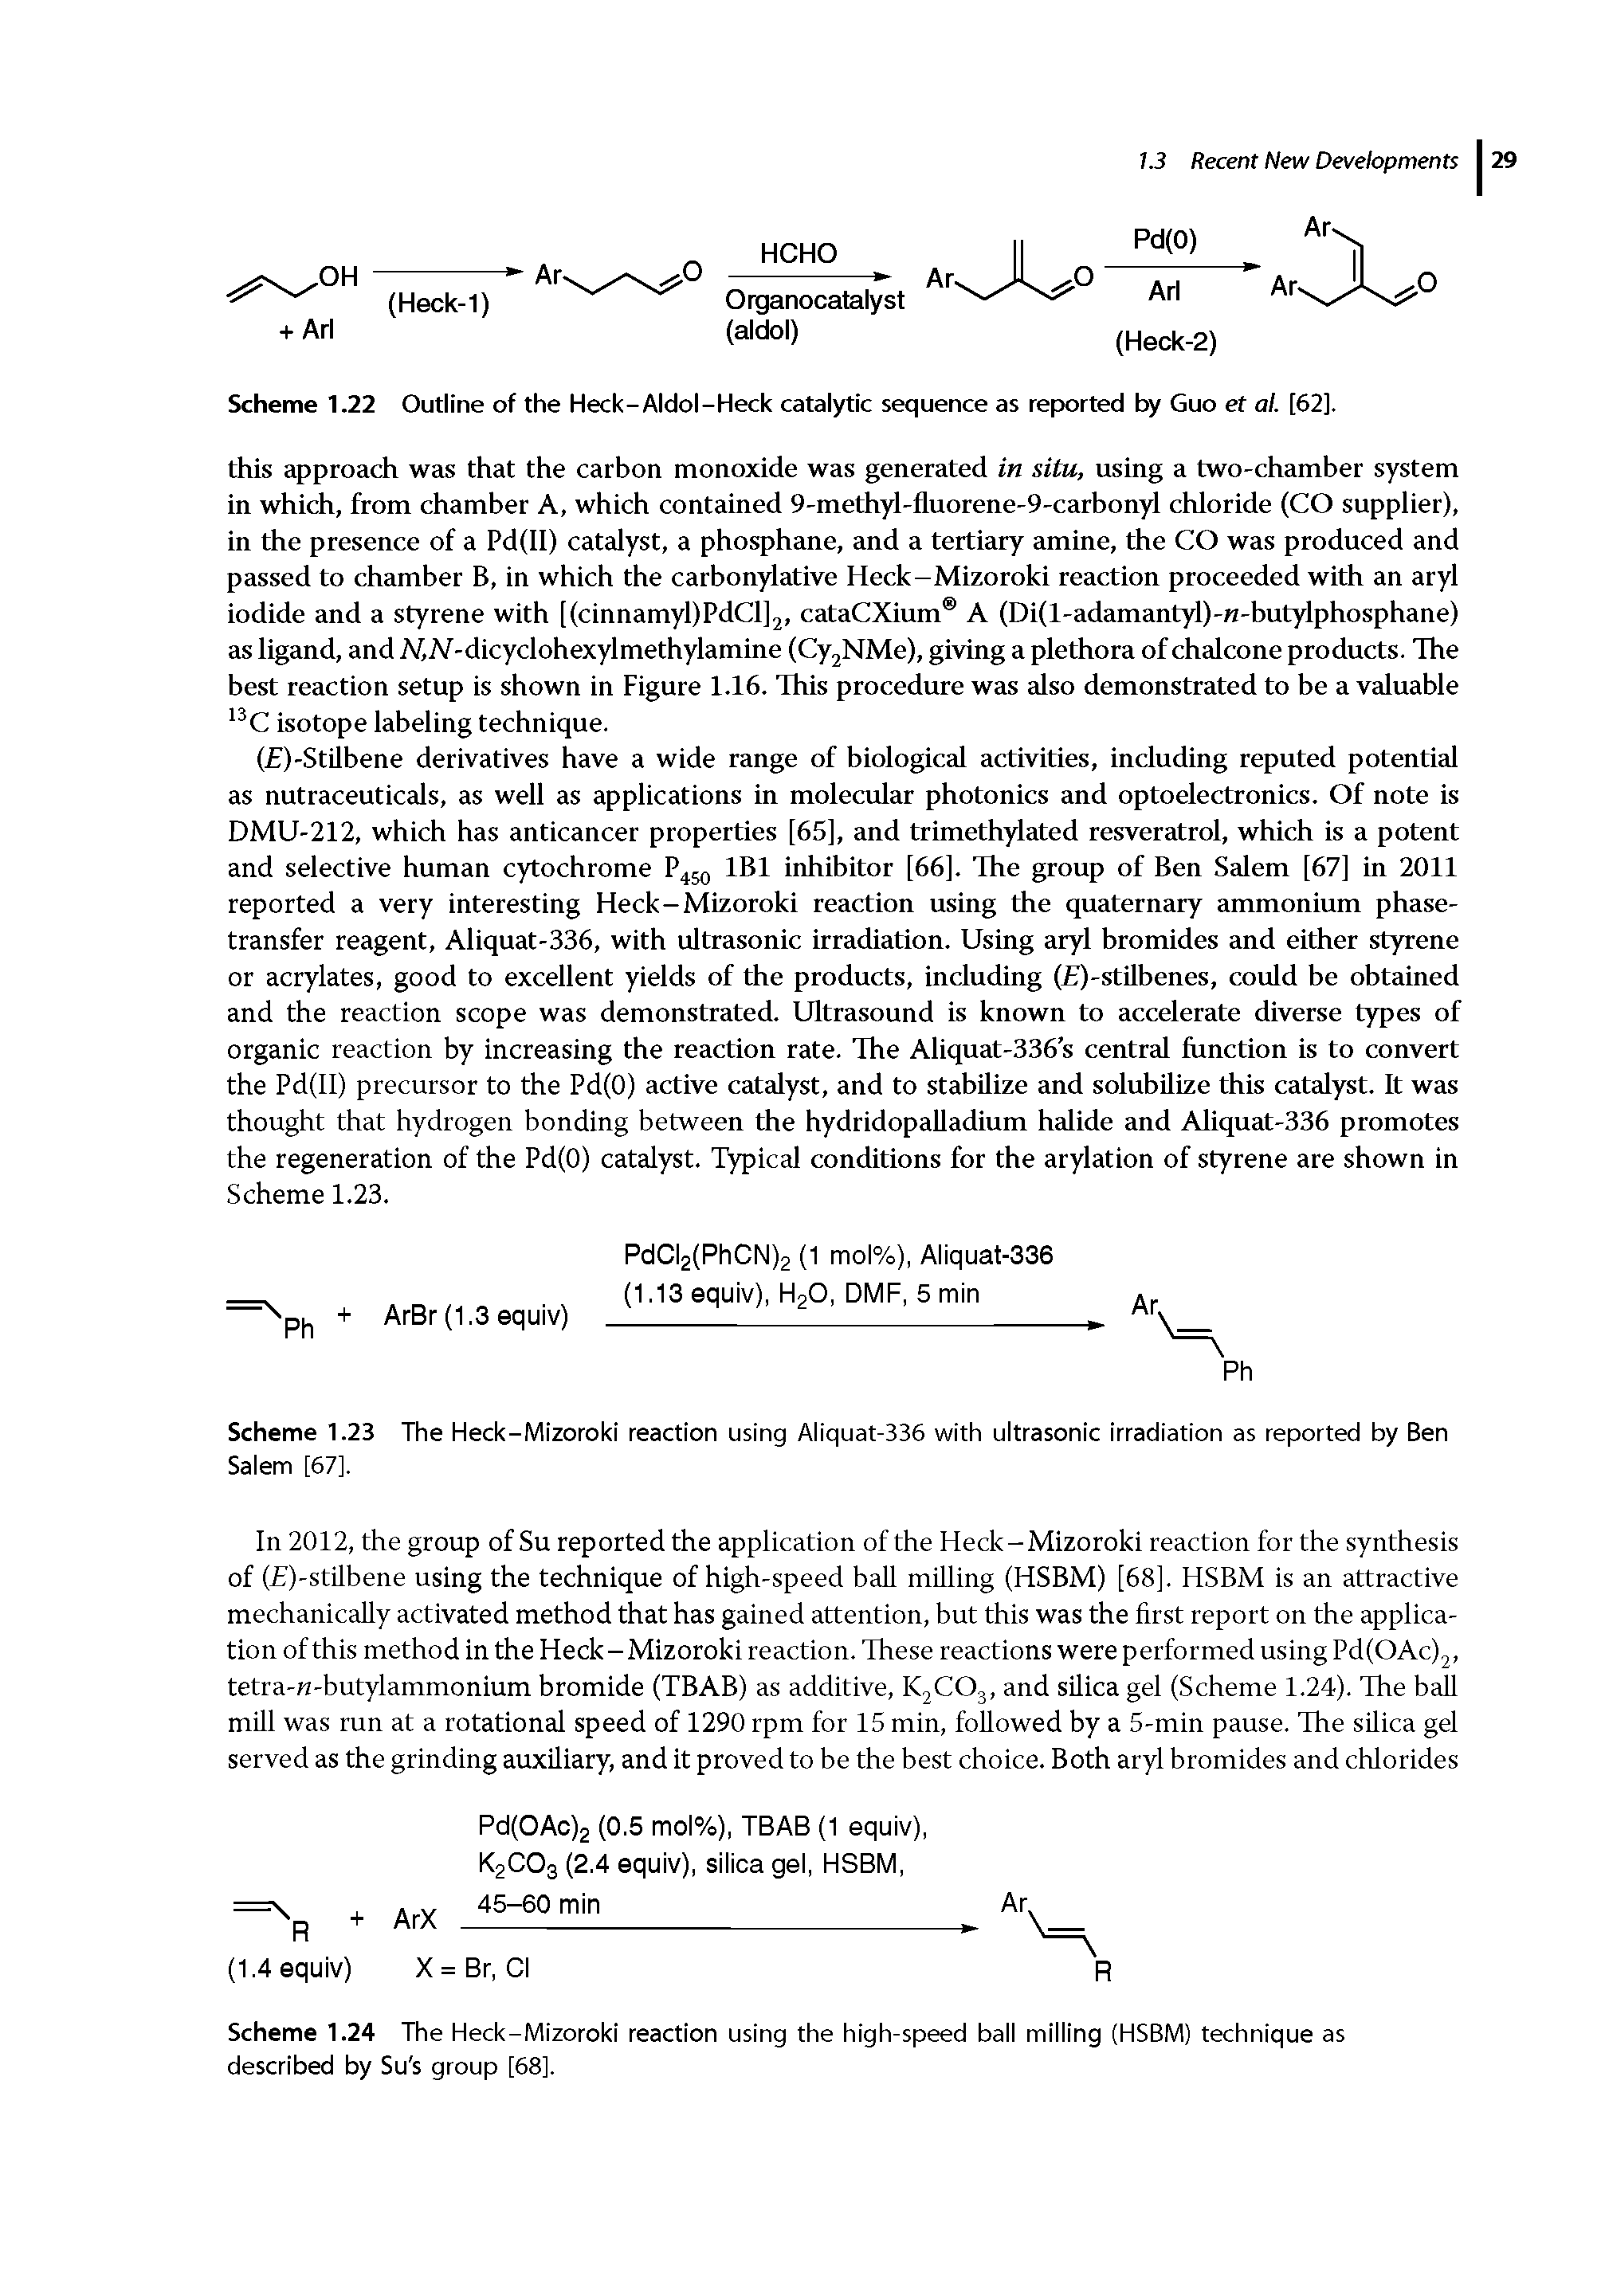 Scheme 1.24 The Heck-Mizoroki reaction using the high-speed ball milling (HSBM) technique as described by Su s group [68].